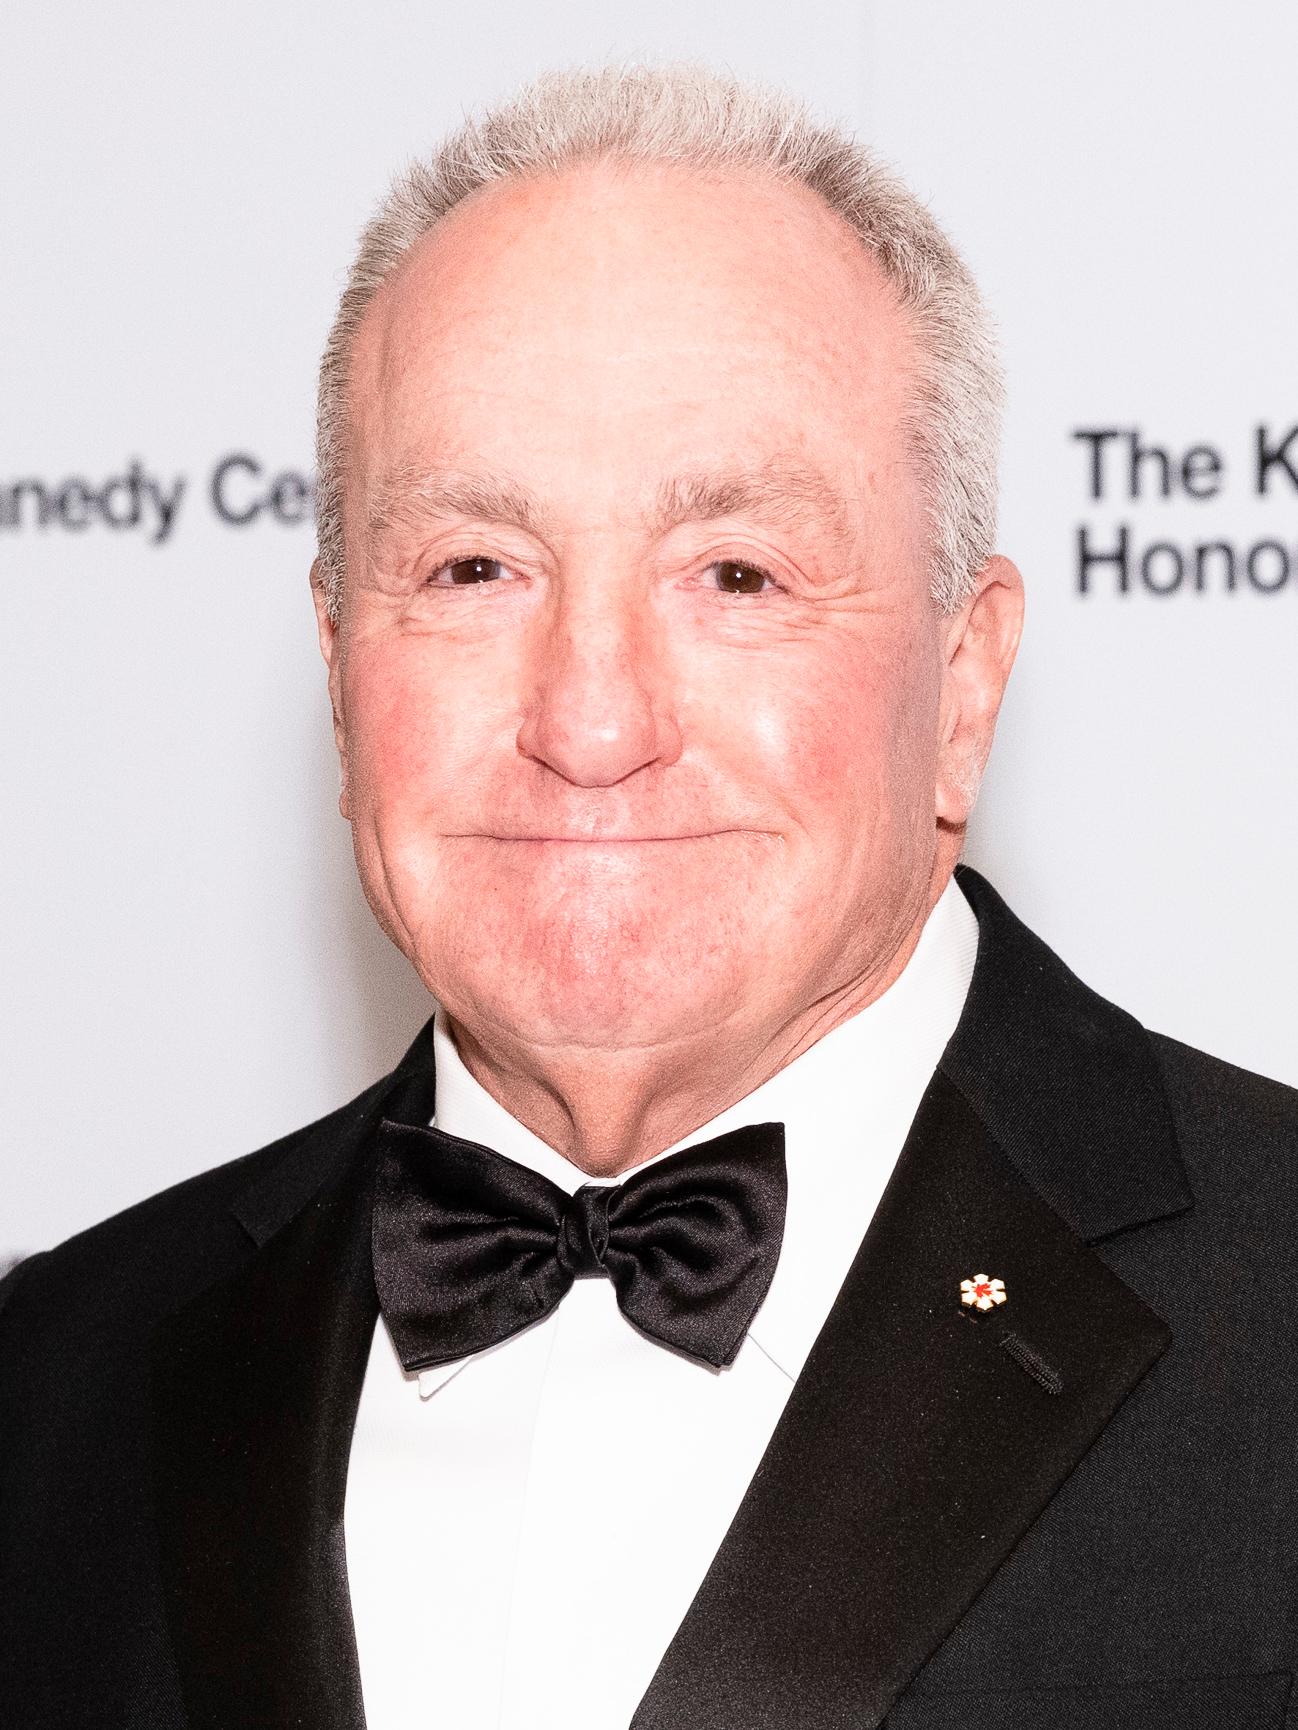 Lorne_Michaels_2021_Kennedy_Center_Honors_(cropped)